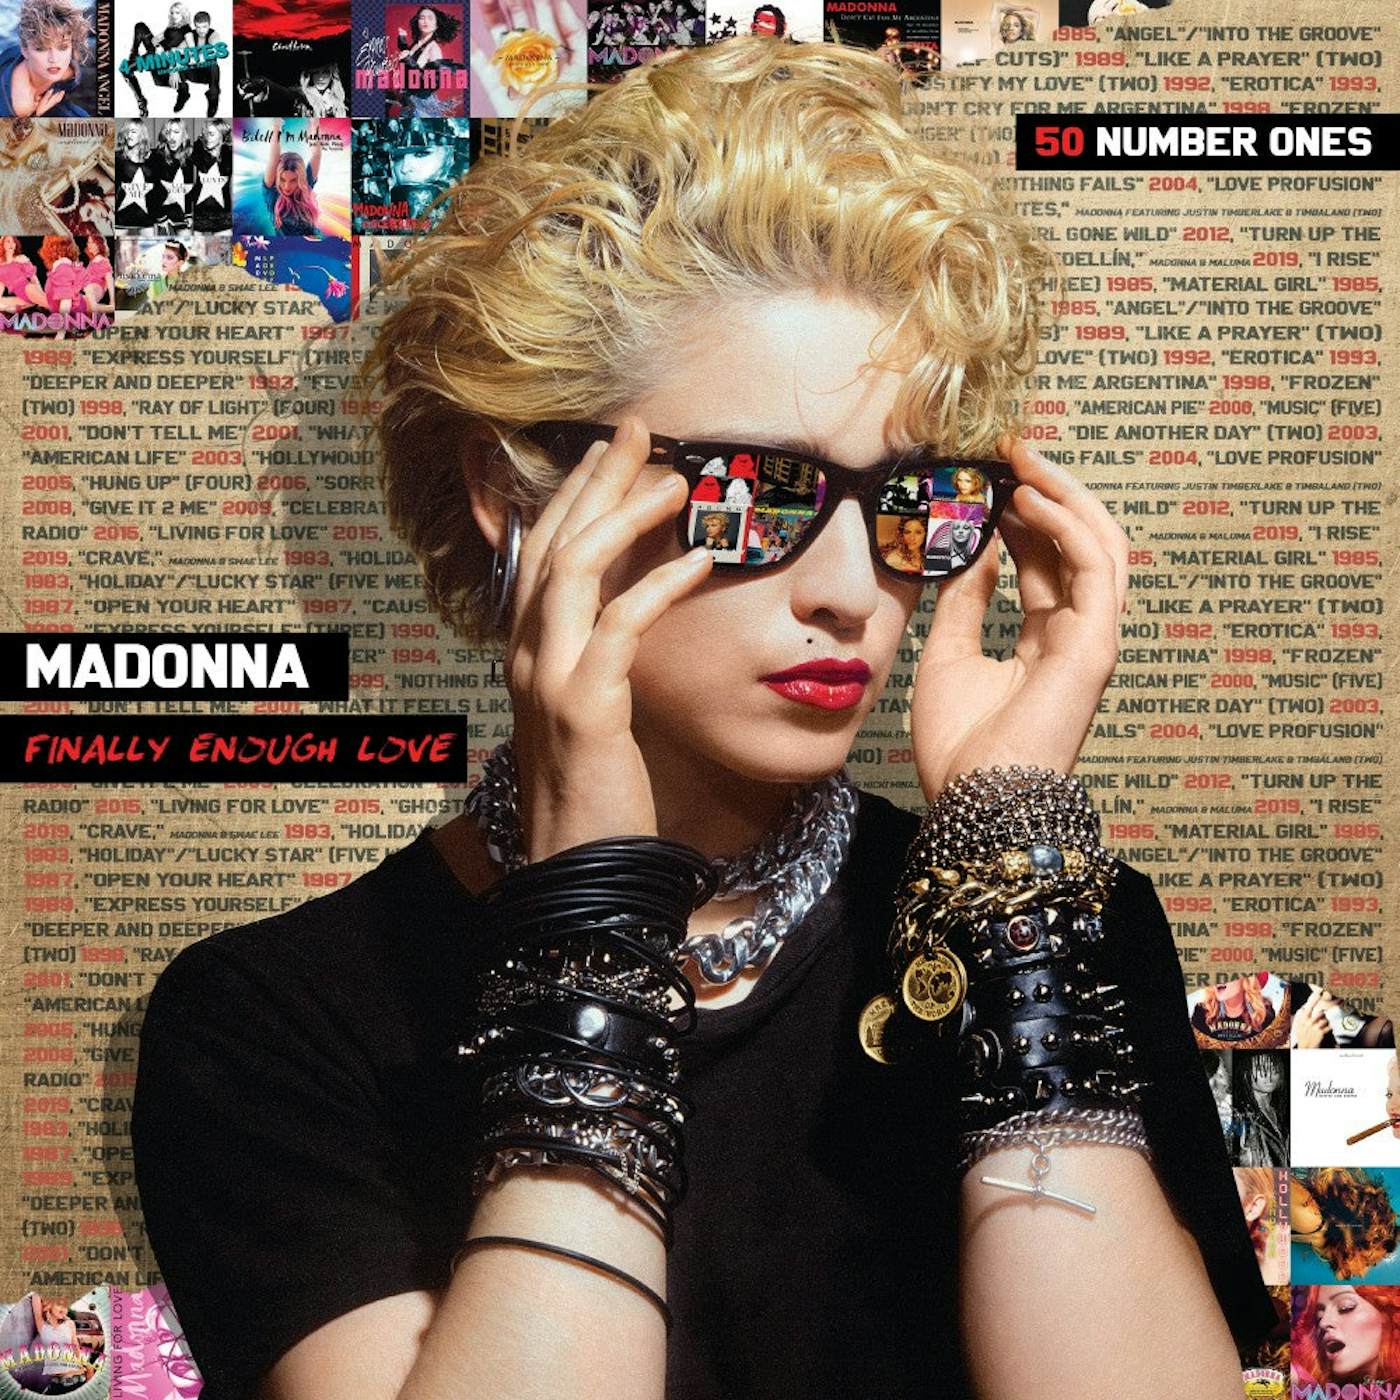 Madonna Finally Enough Love: Fifty Number Ones – Rainbow Edition